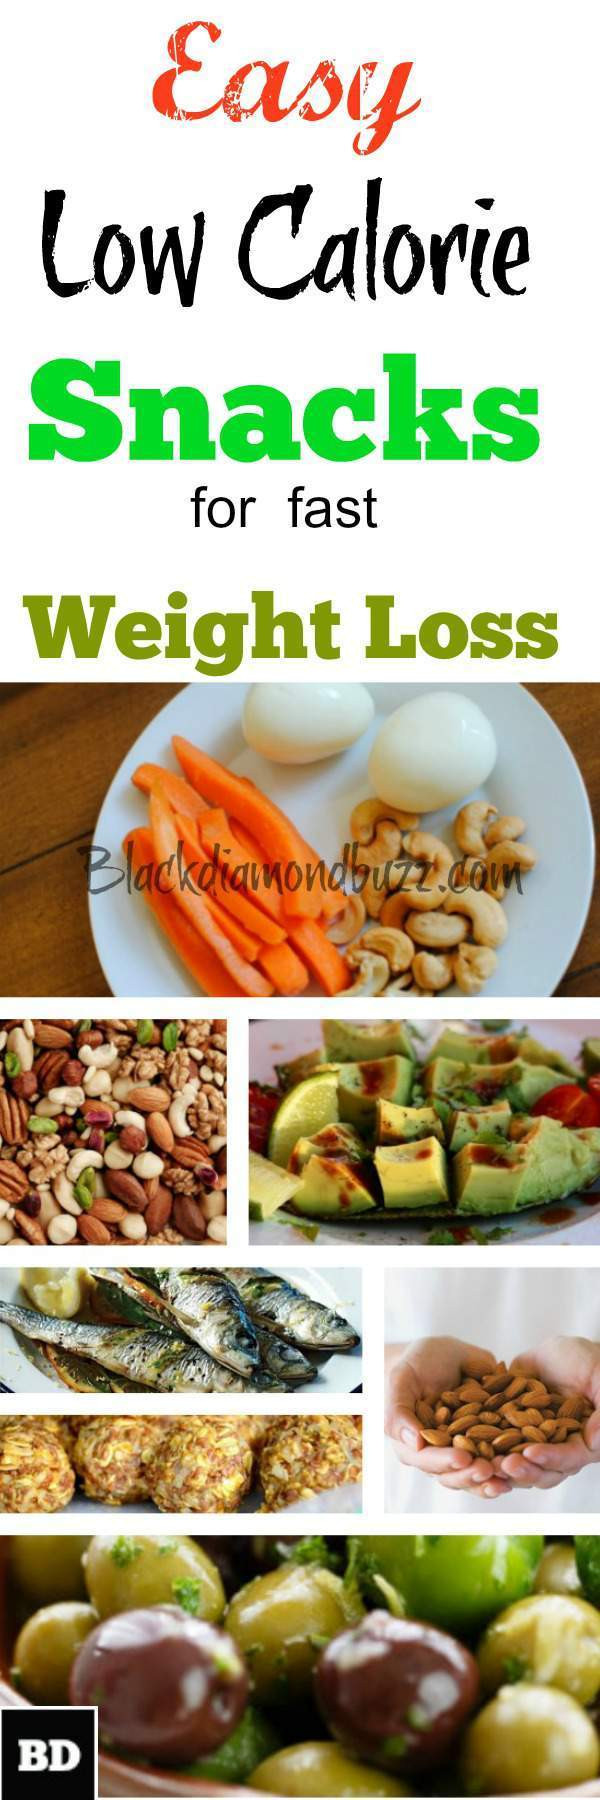 Low Calorie Snack Recipes
 10 Best Easy Healthy Low Calorie Snacks for Weight Loss